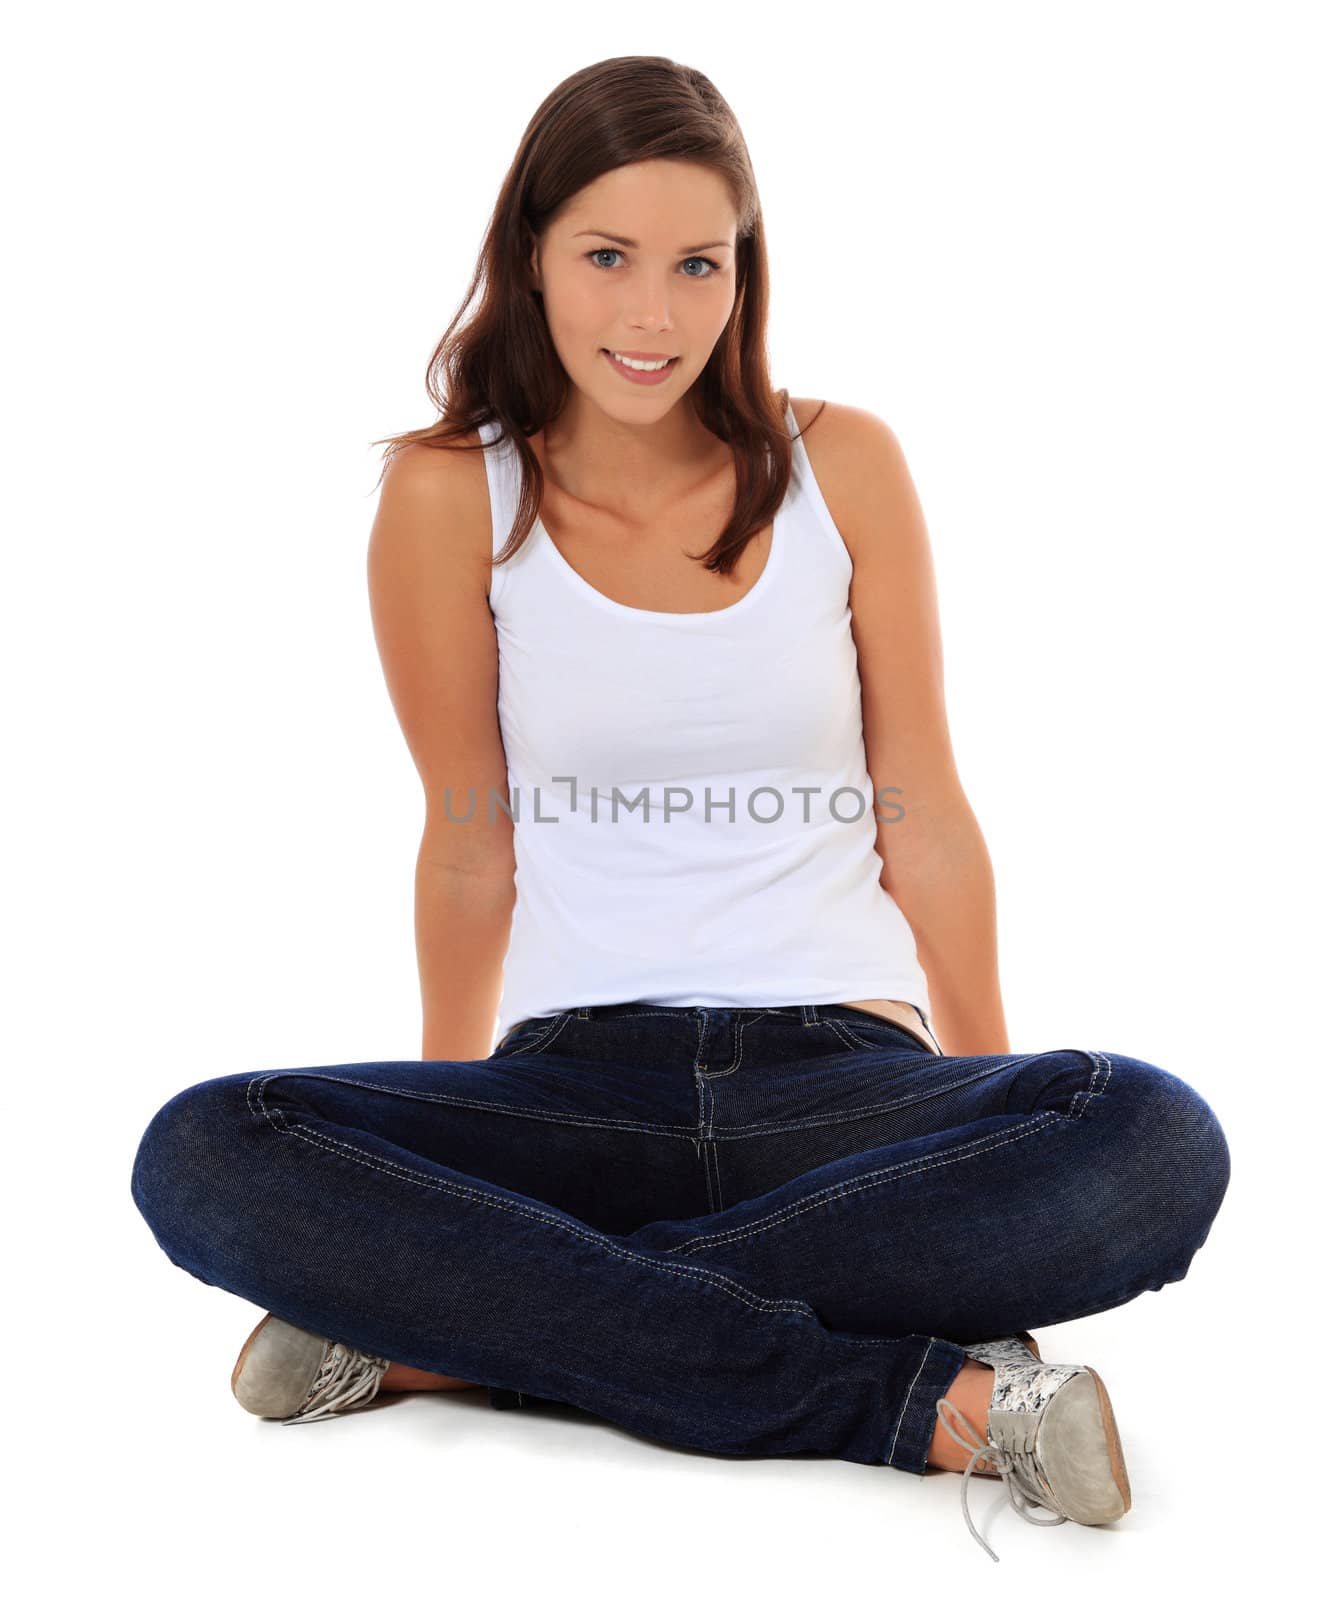 Attractive young woman sitting on the floor. All on white background.